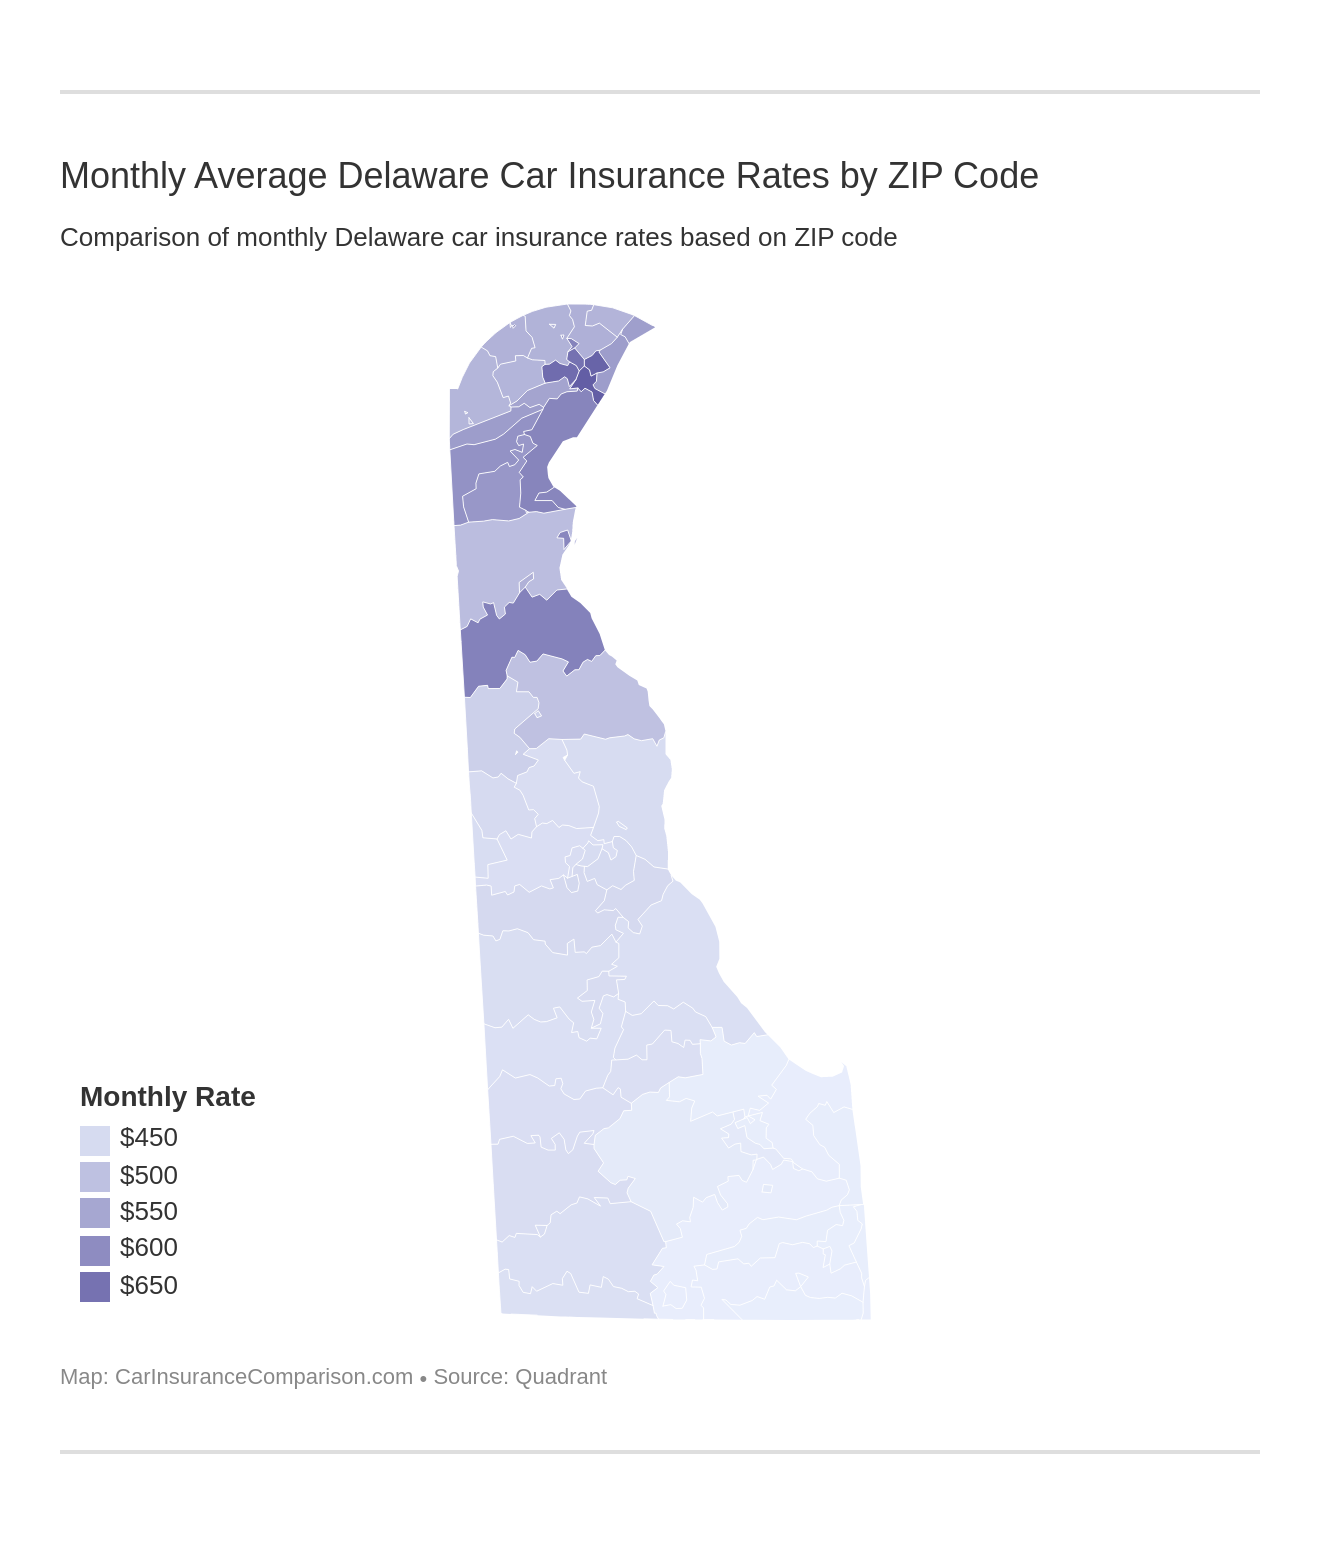 Monthly Average Delaware Car Insurance Rates by ZIP Code